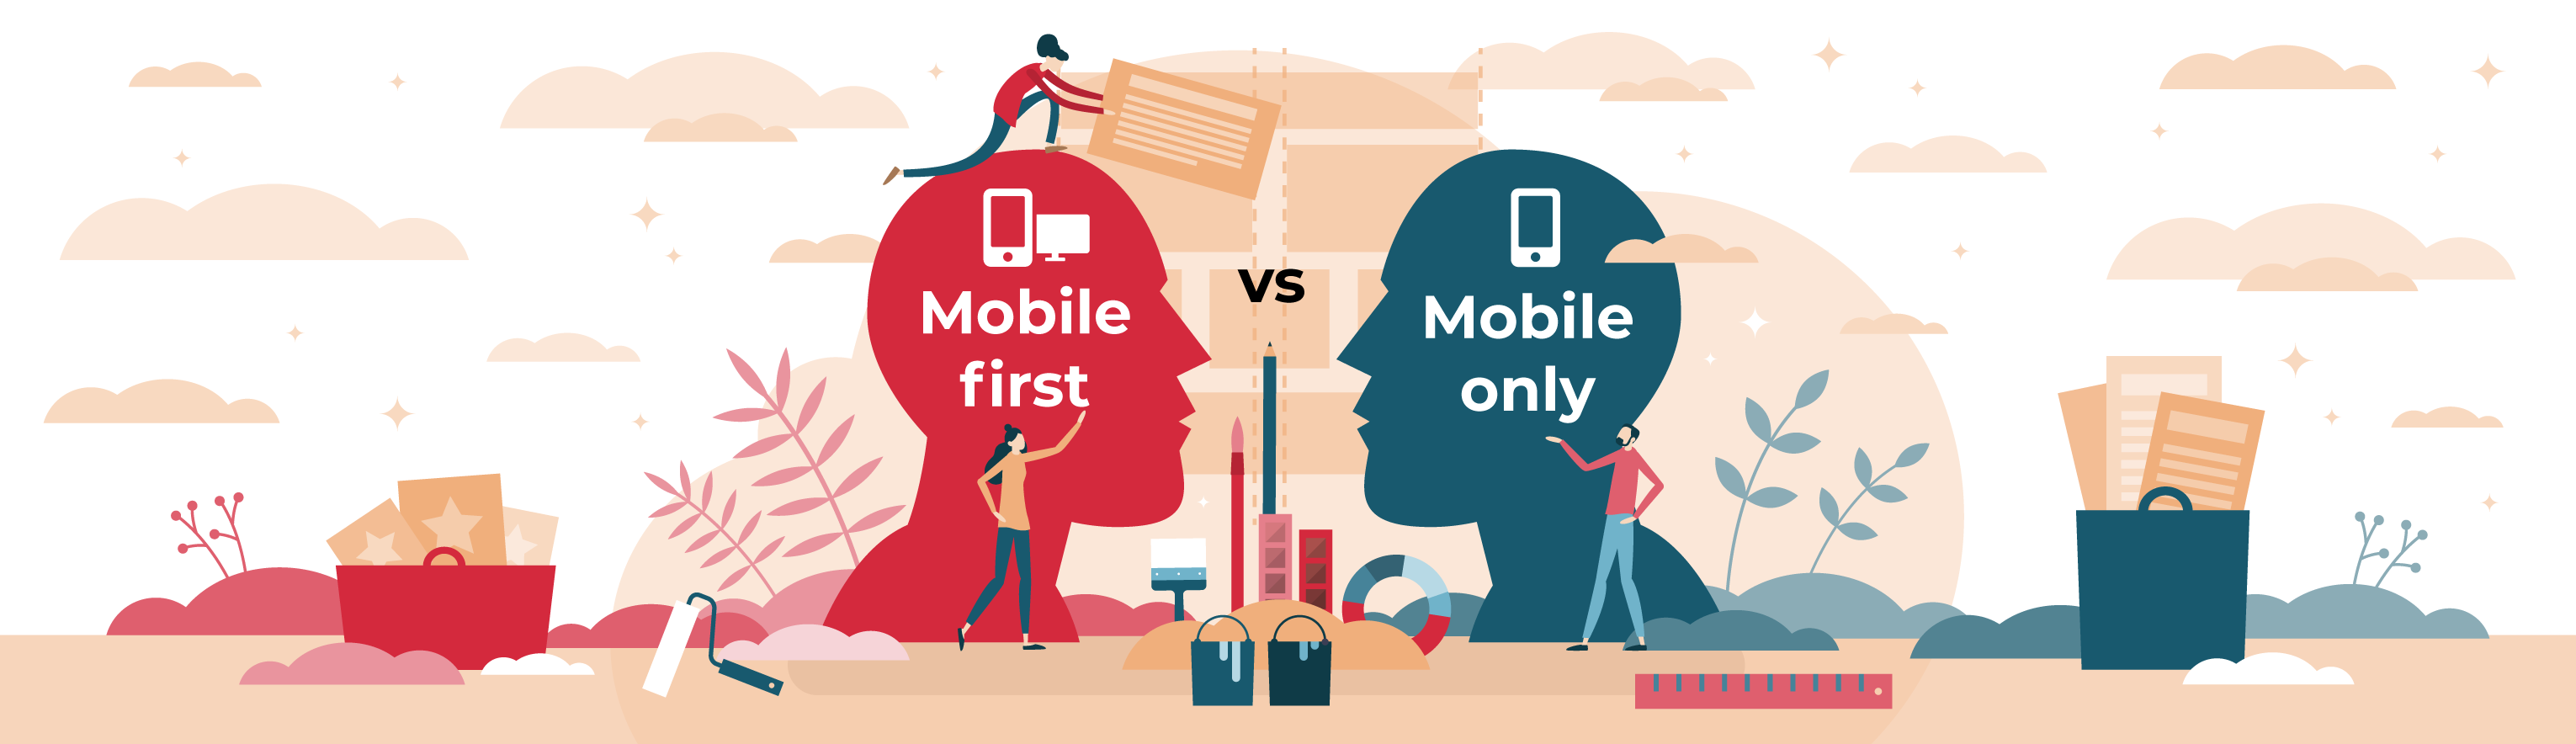 Responsive Design – “mobile first” vs. “mobile only”